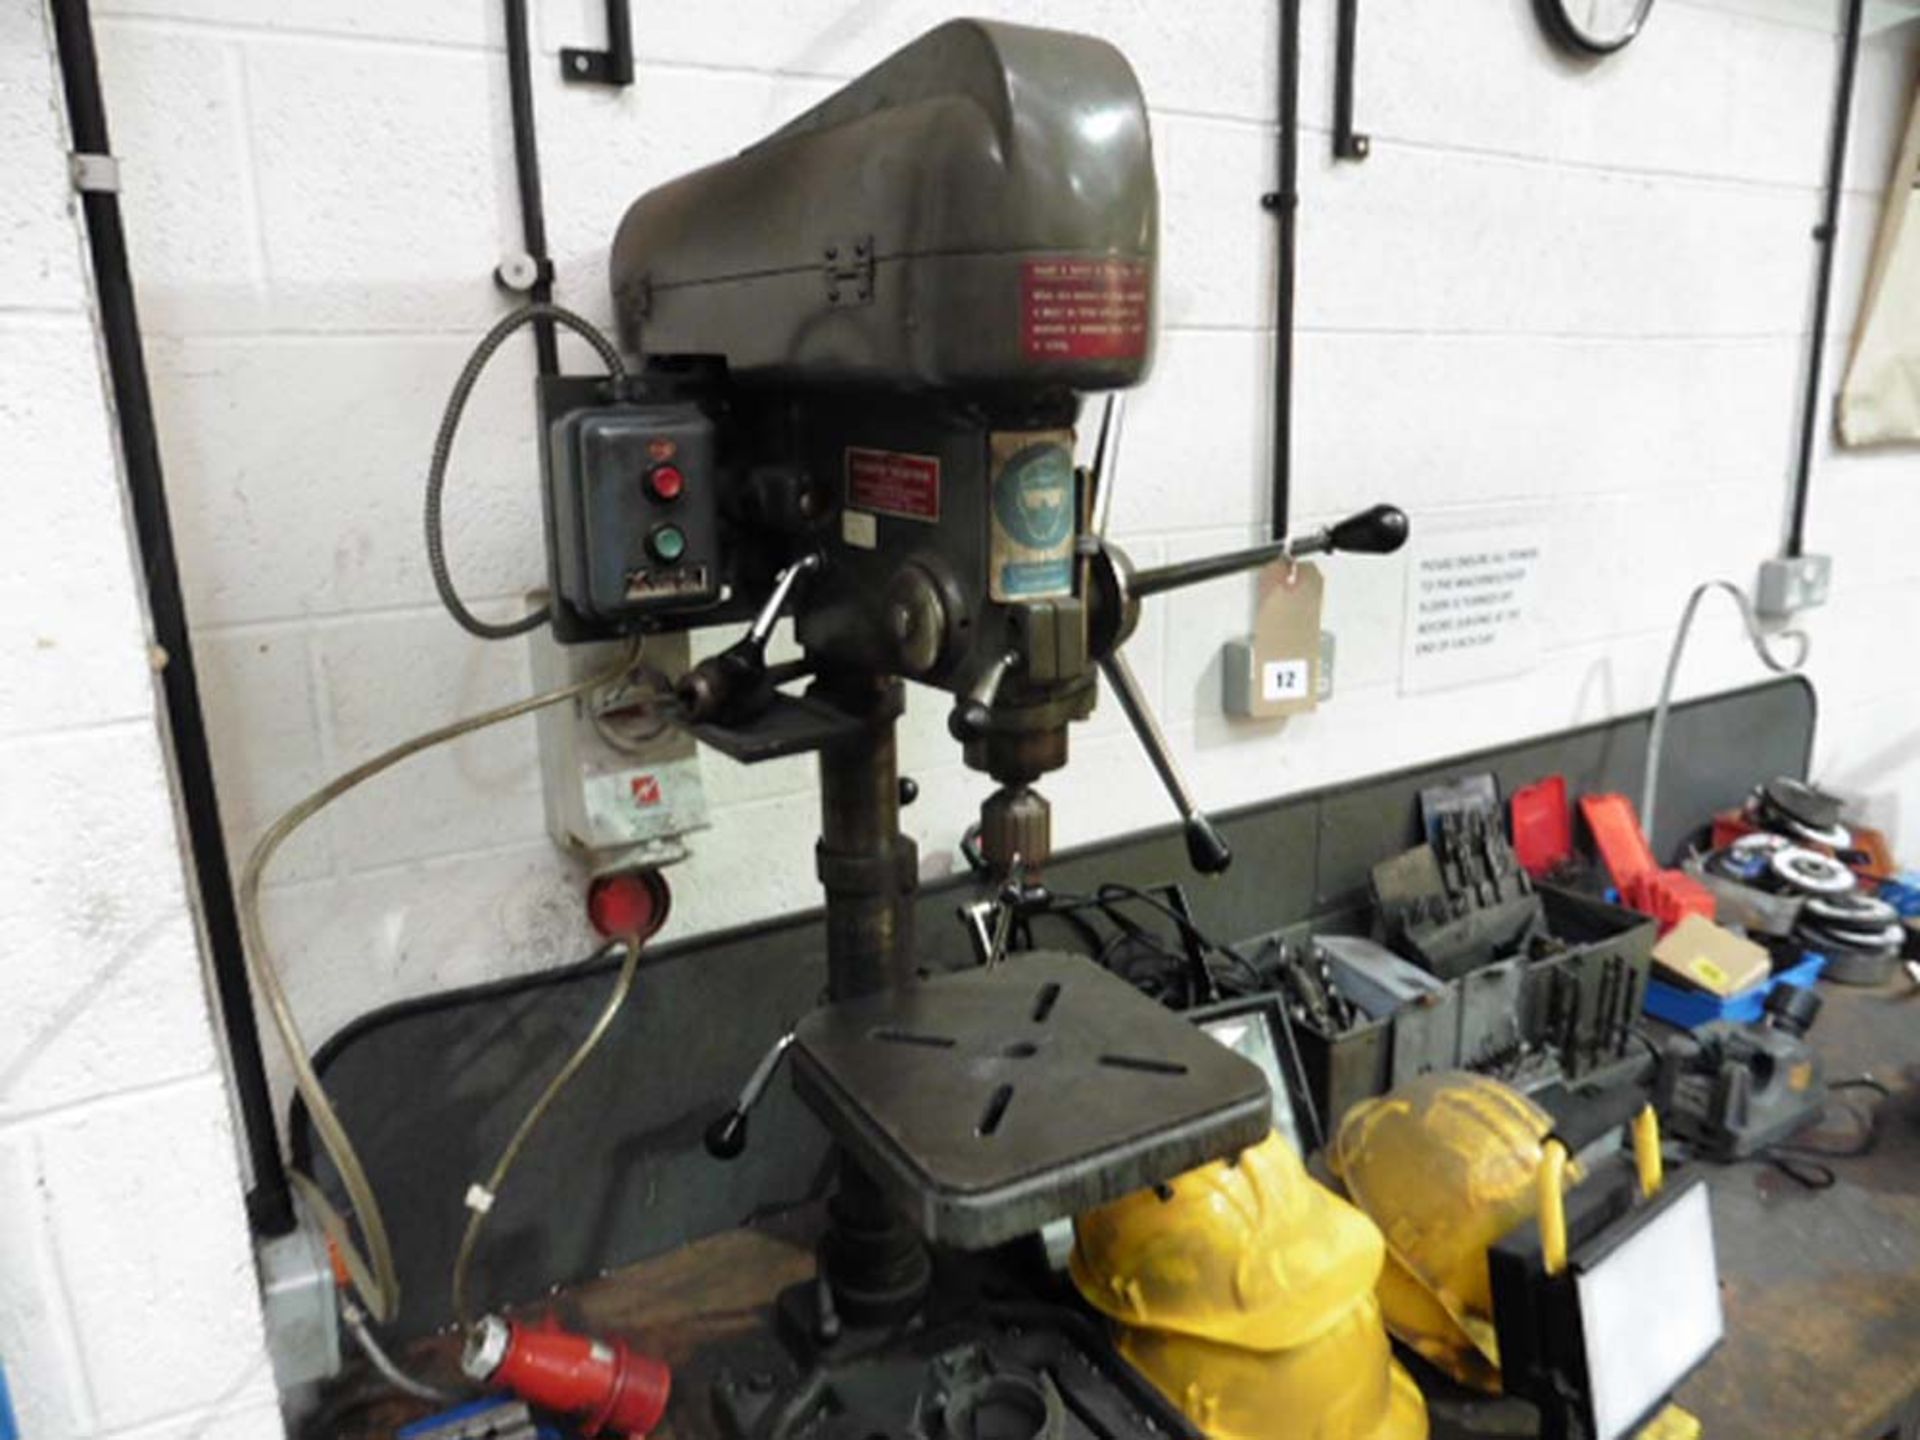 Meddings 3 phase bench drill - Image 2 of 2